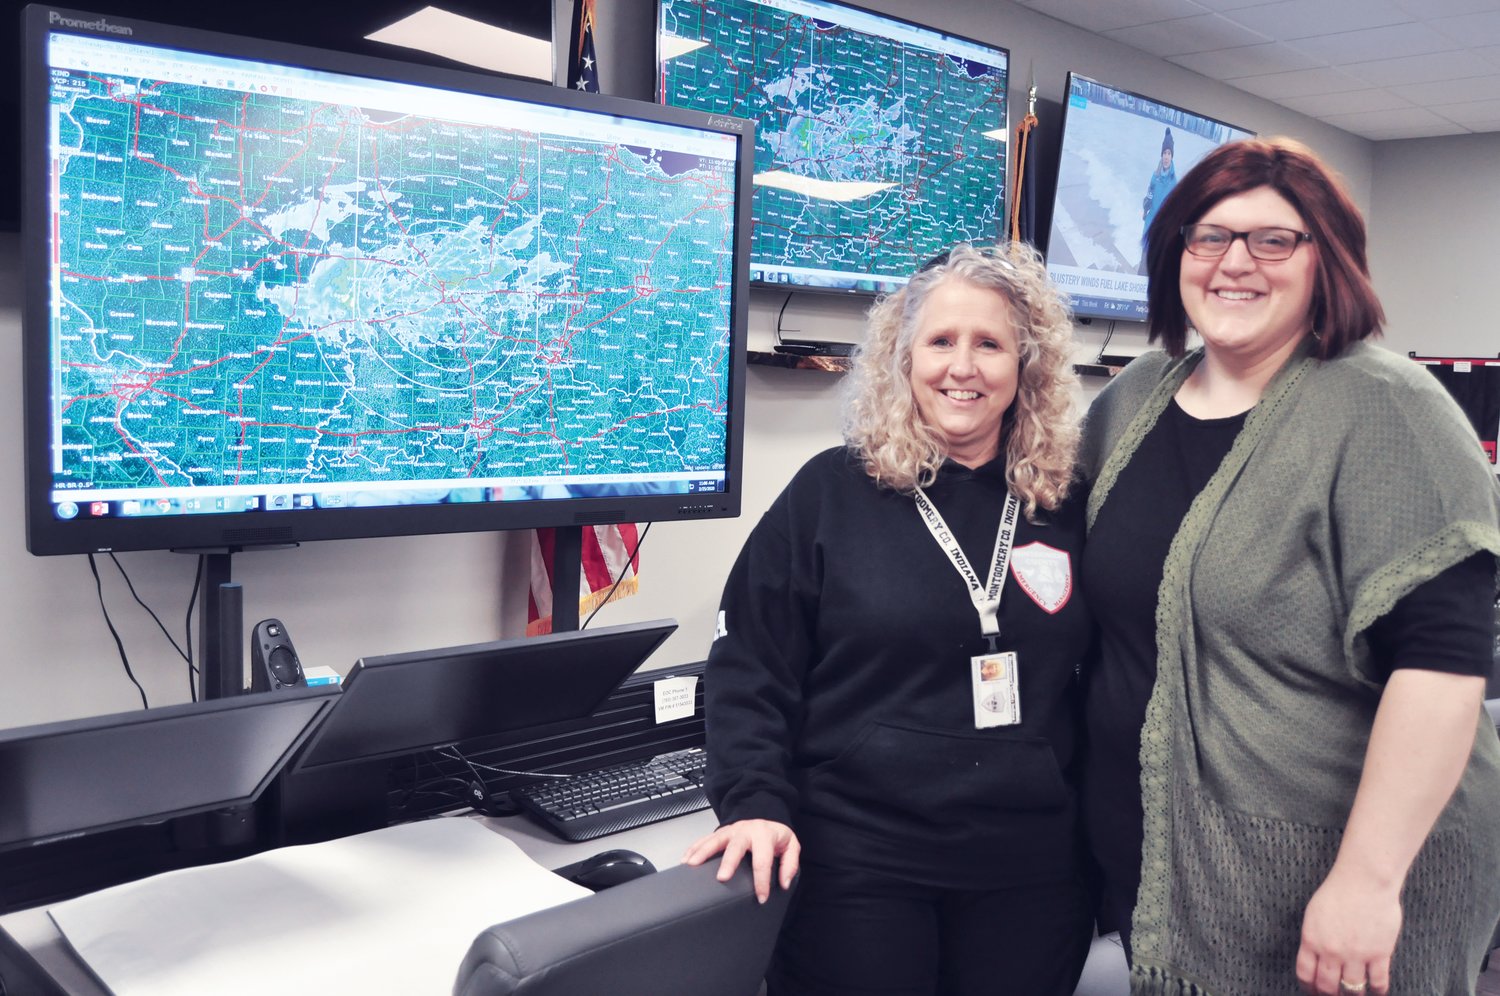 Reagan Knobloch, right, stands in the Montgomery County emergency command center with emergency management director Shari Harrington. Knobloch completed an internship with the emergency management agency this week.